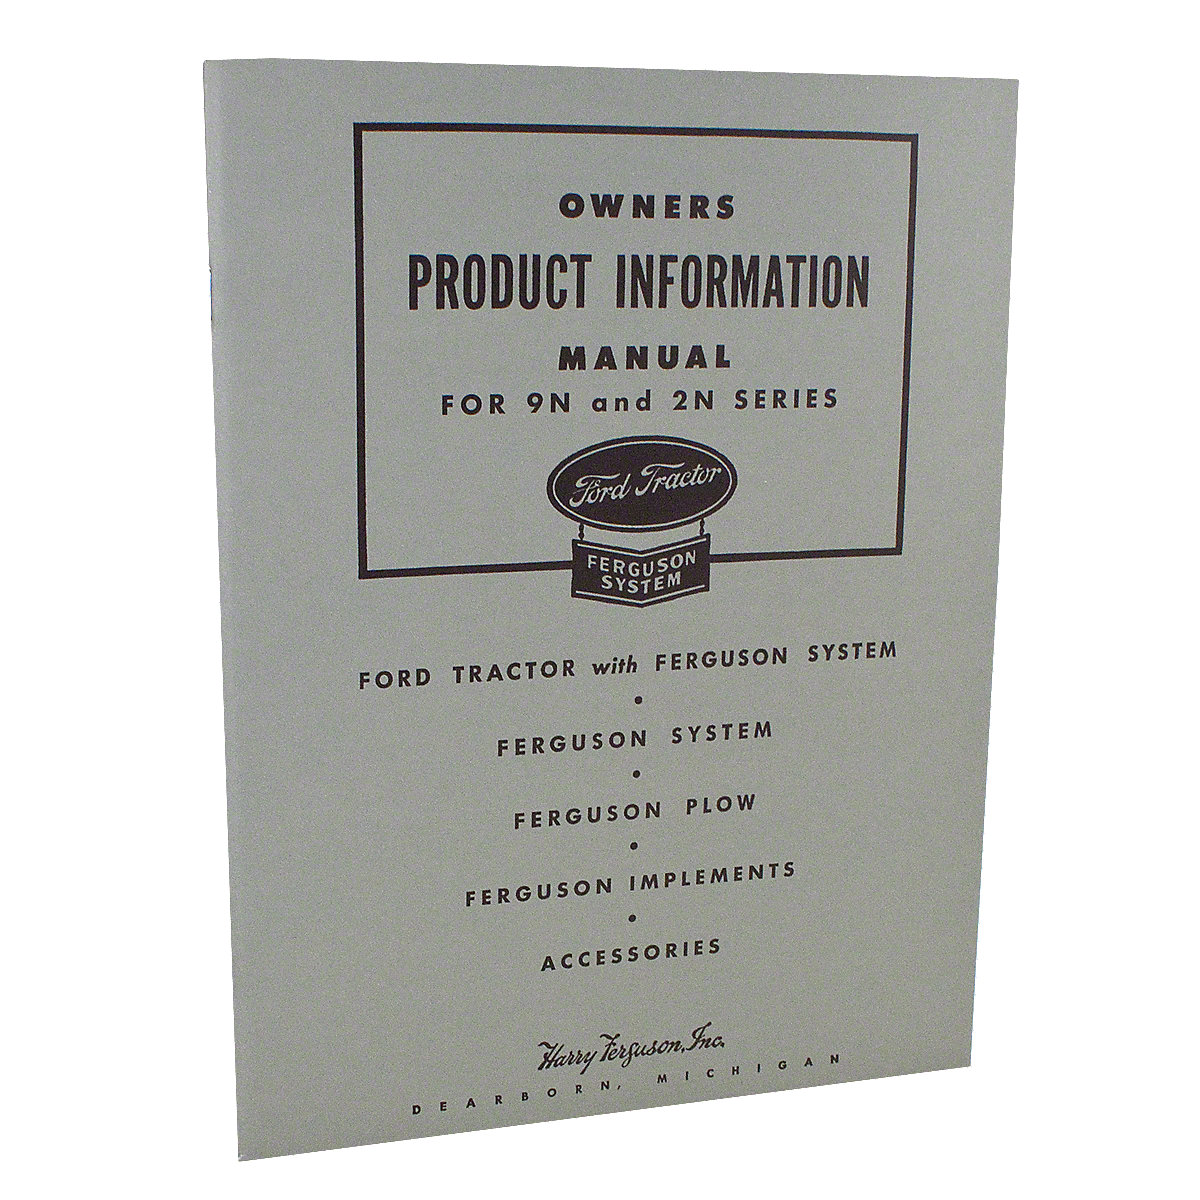 Owners Product Information Manual For Massey Ferguson, Ferguson System, Ferguson Plow, 21 Different Implements, And Accessories.